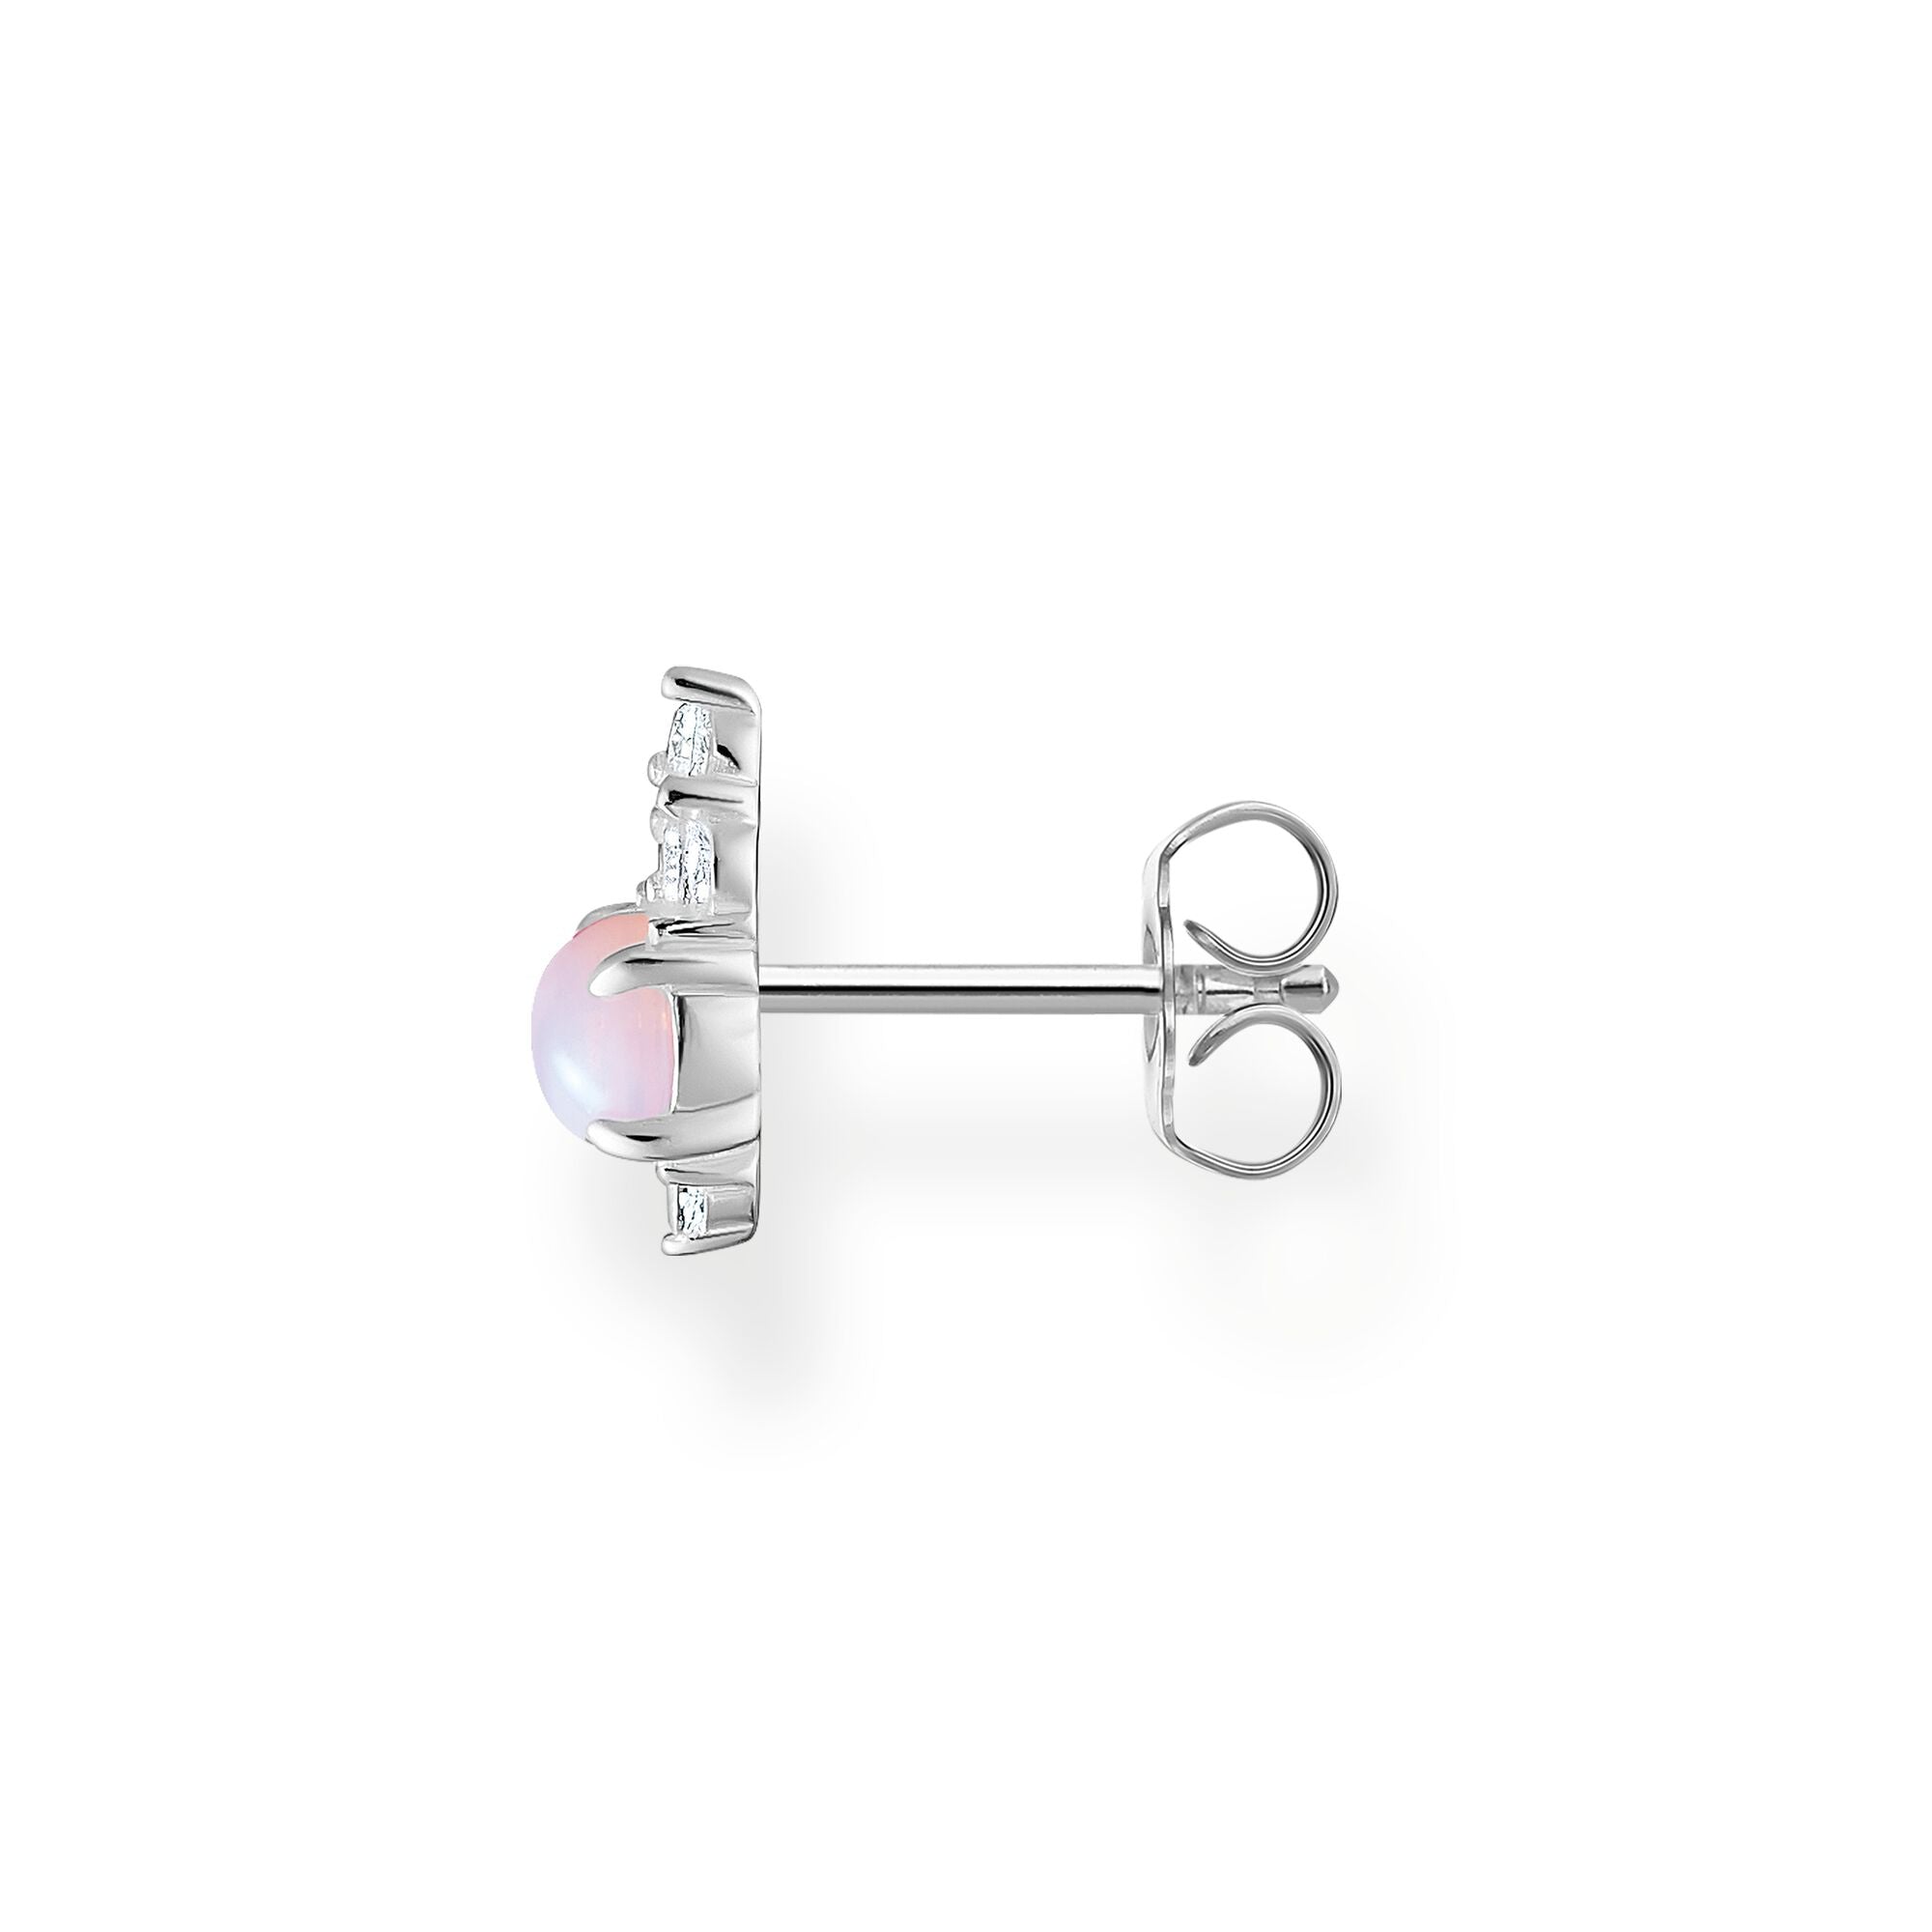 Thomas Sabo sterling silver and pink opal effect stone, white cz single stud earring